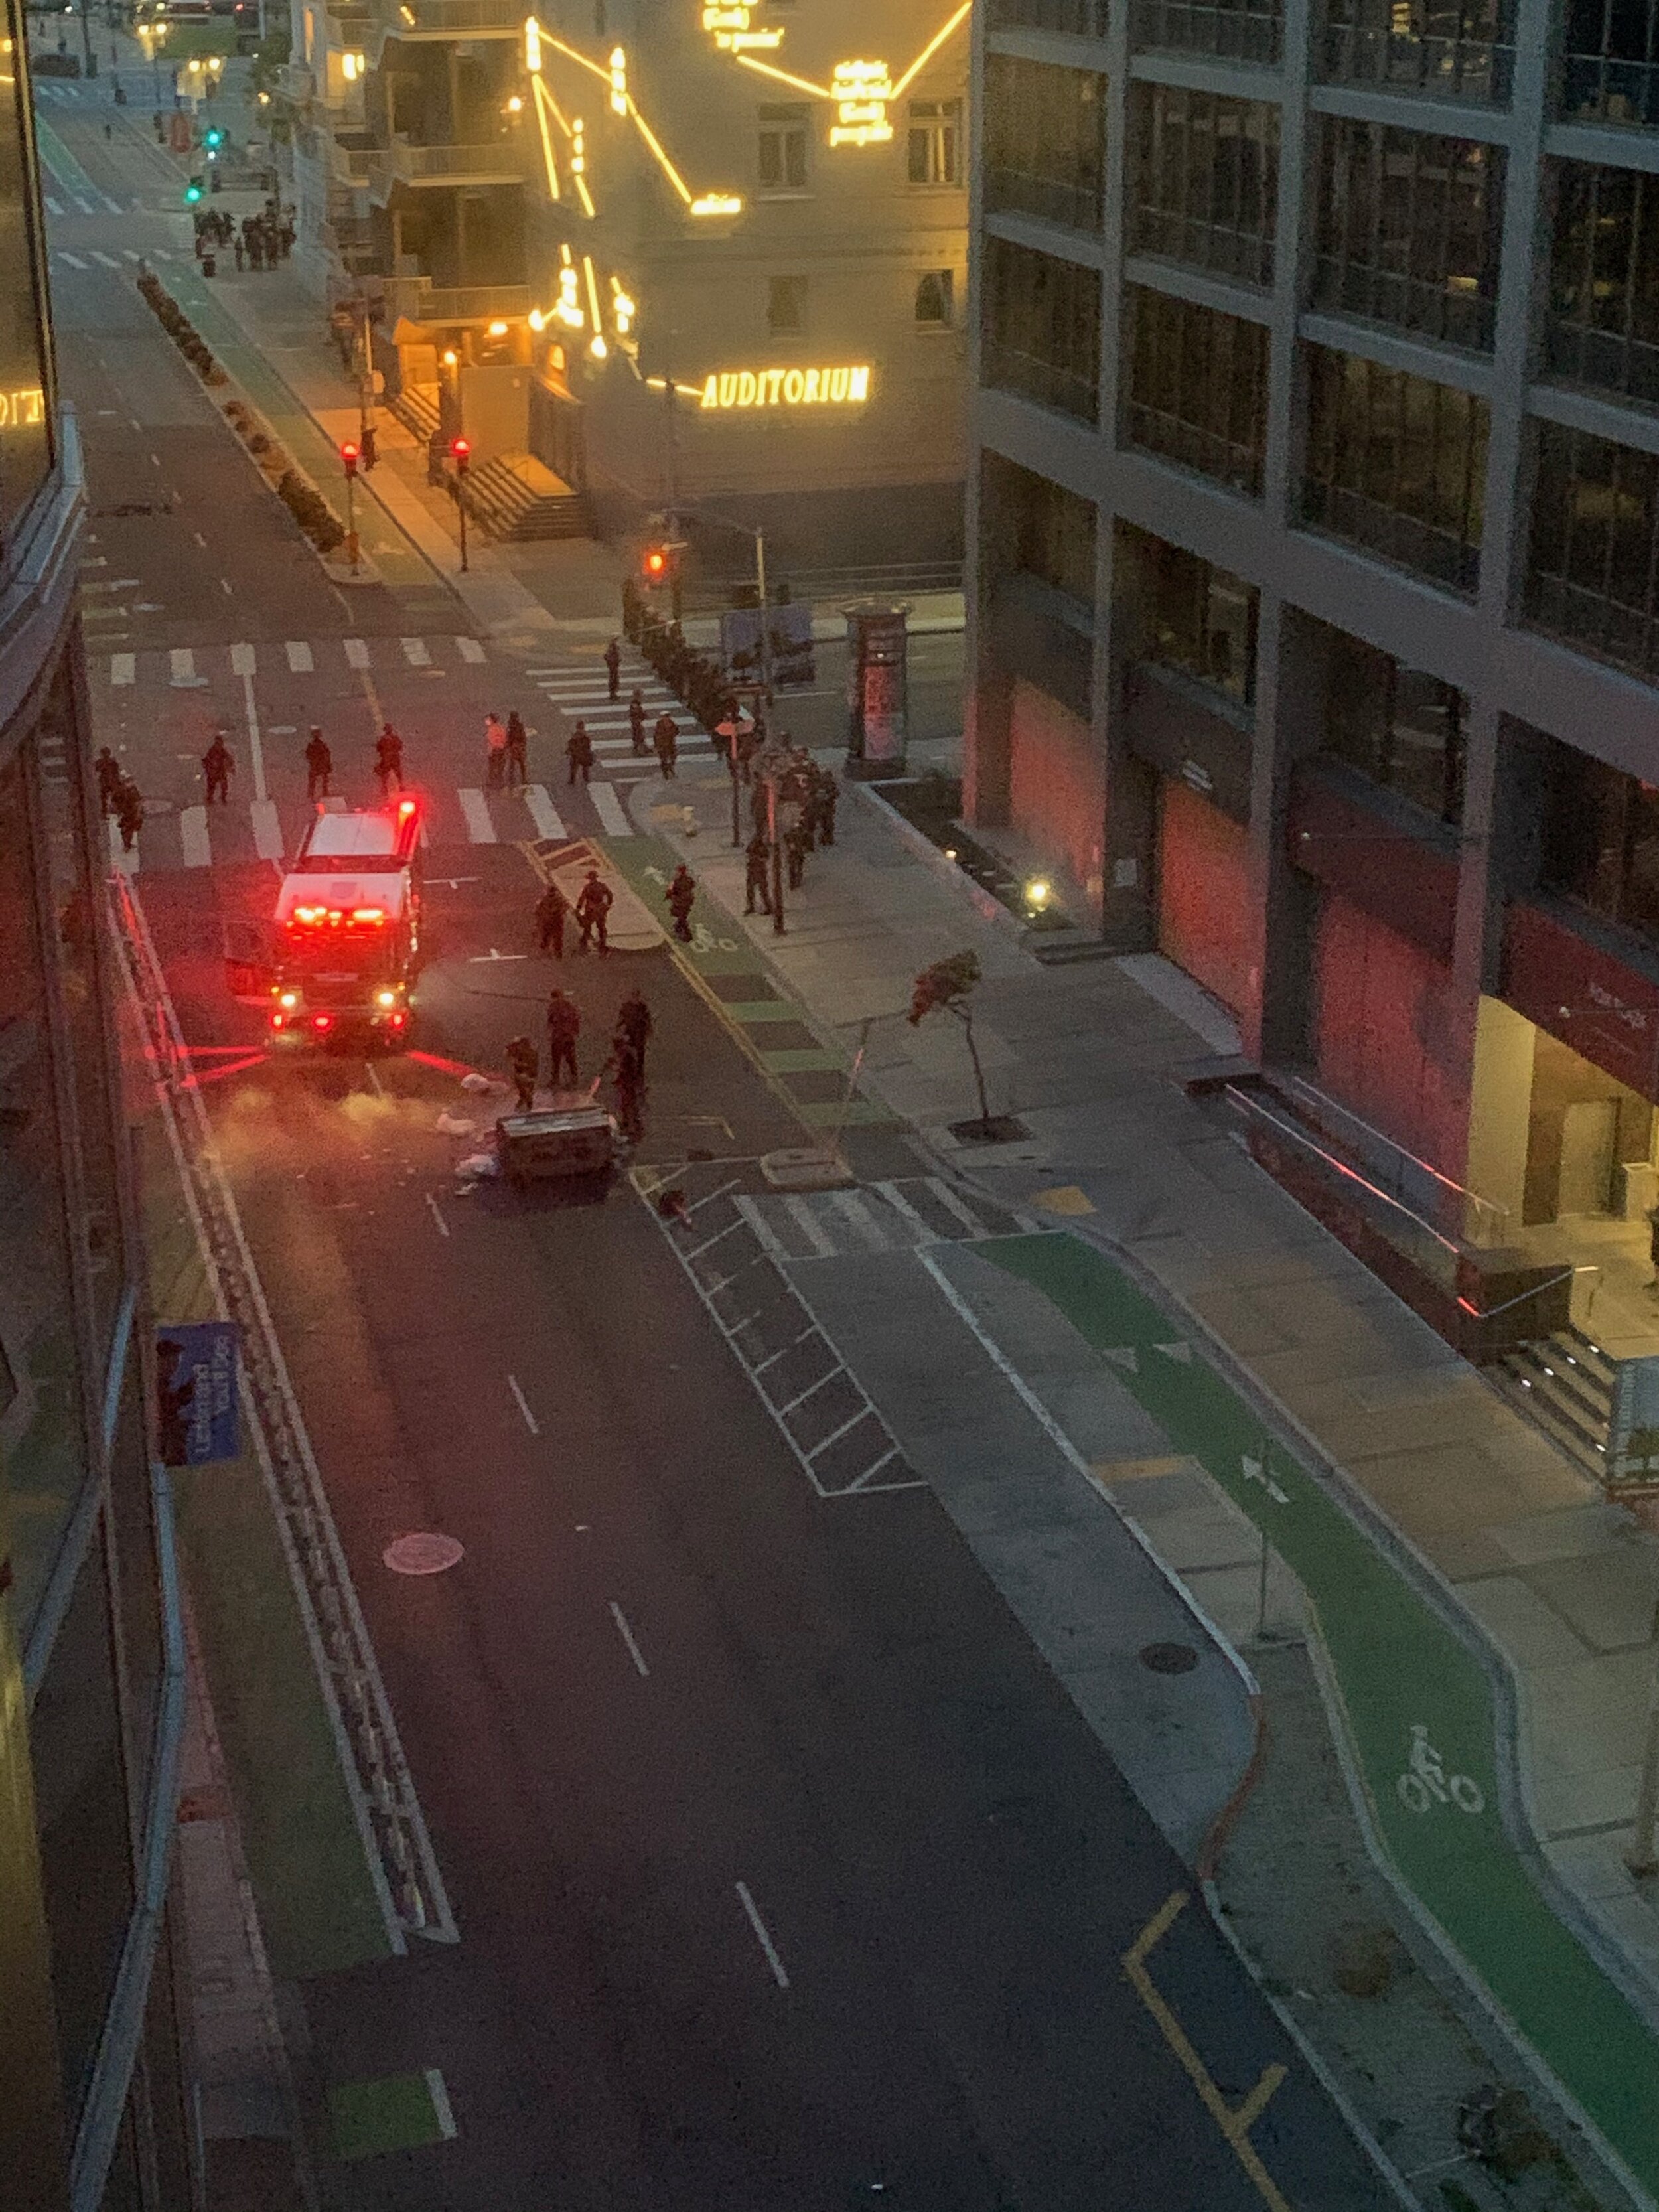  Firefighters brought in to put out the dumpster fire from protestors defying curfew.   June 31, 2020 